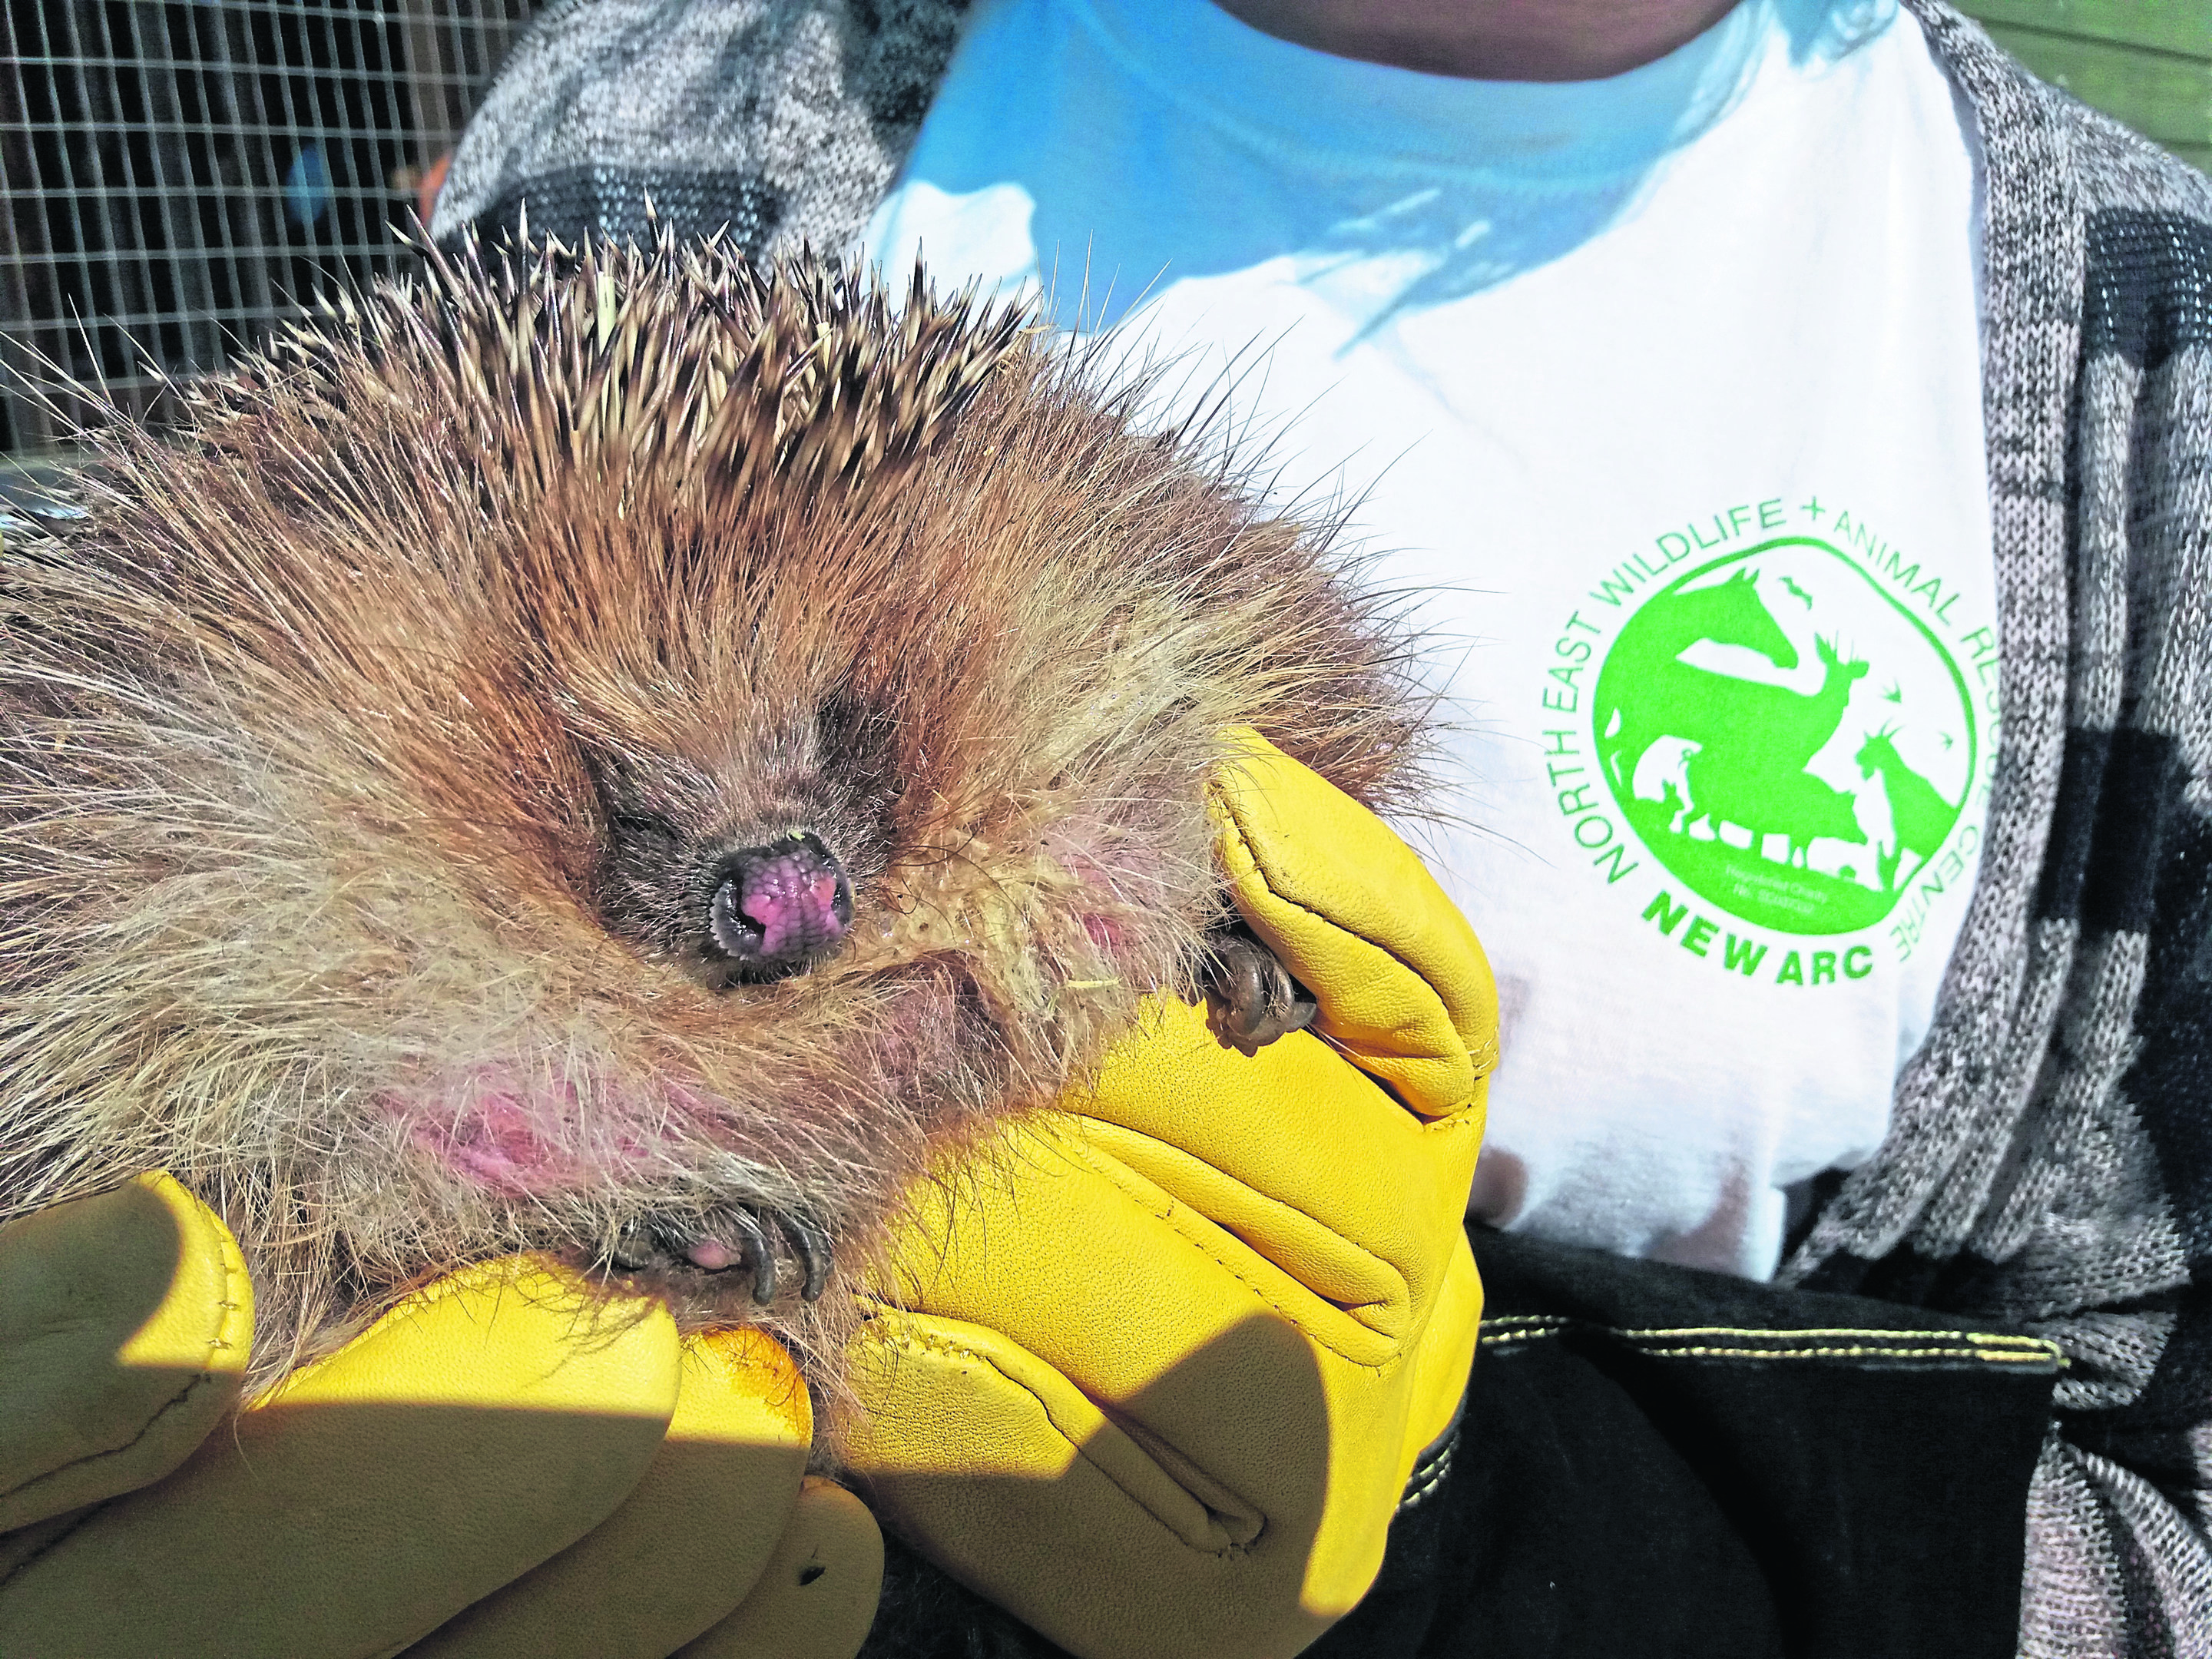 Arbuckle the hedgehog at New Arc